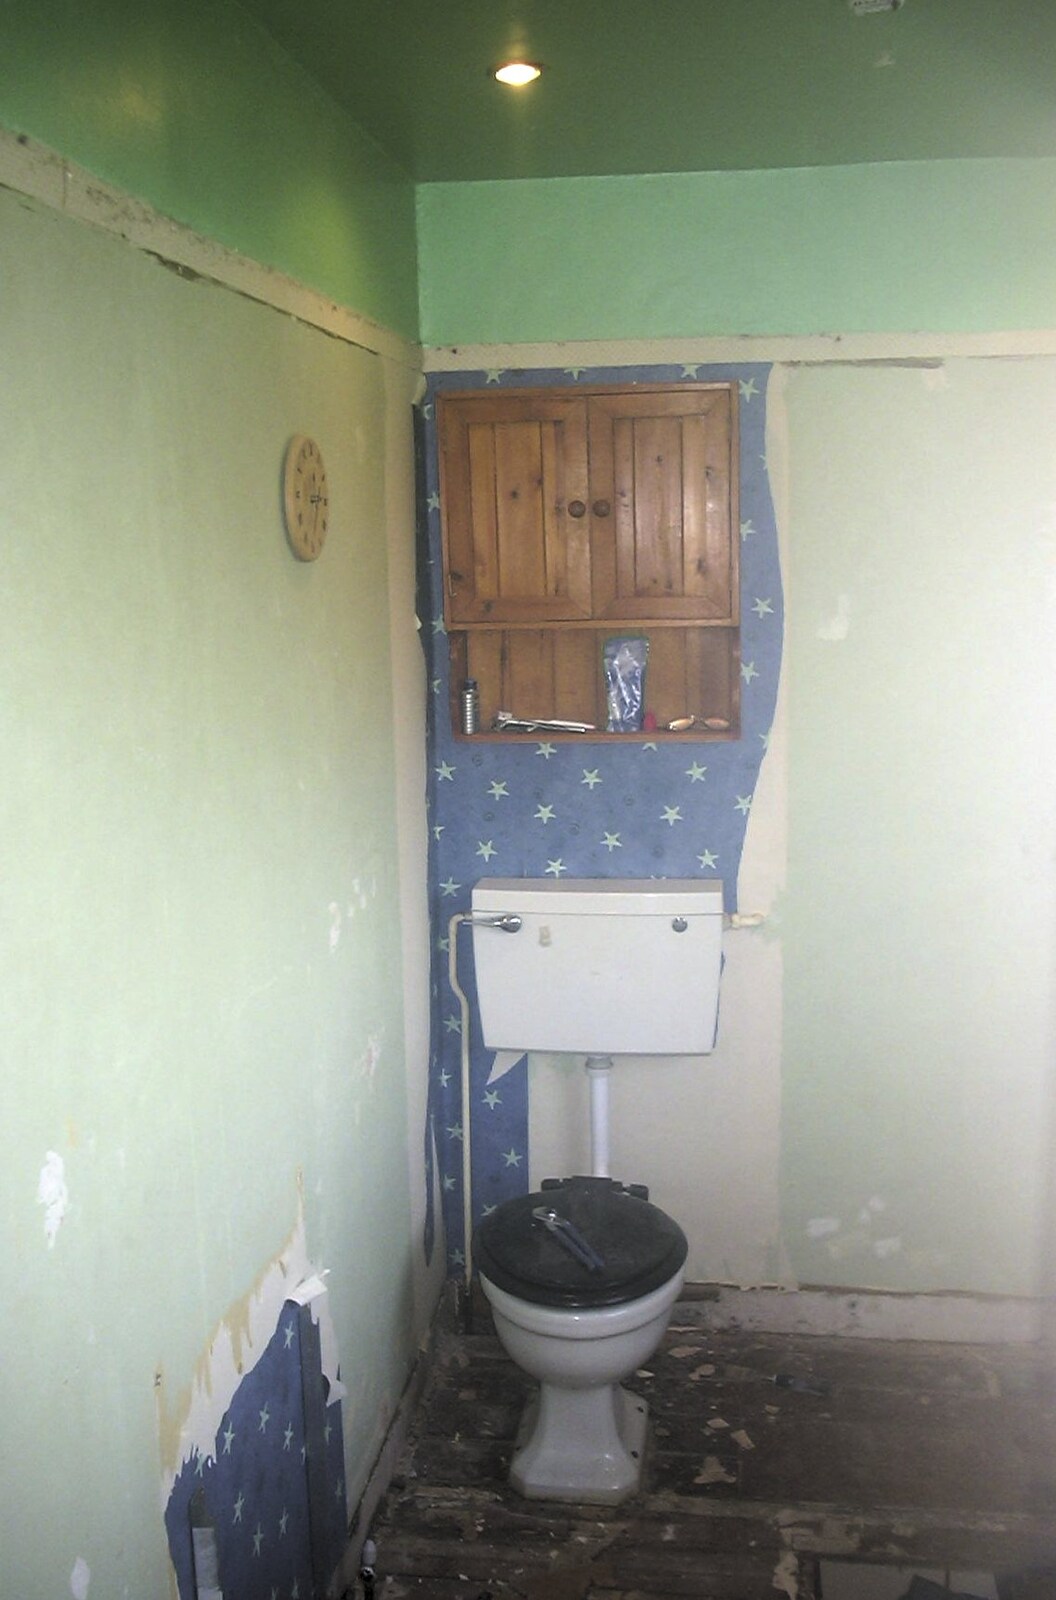 The 1950s toilet from Bathroom Rebuilding, Brome, Suffolk - 1st February 2002